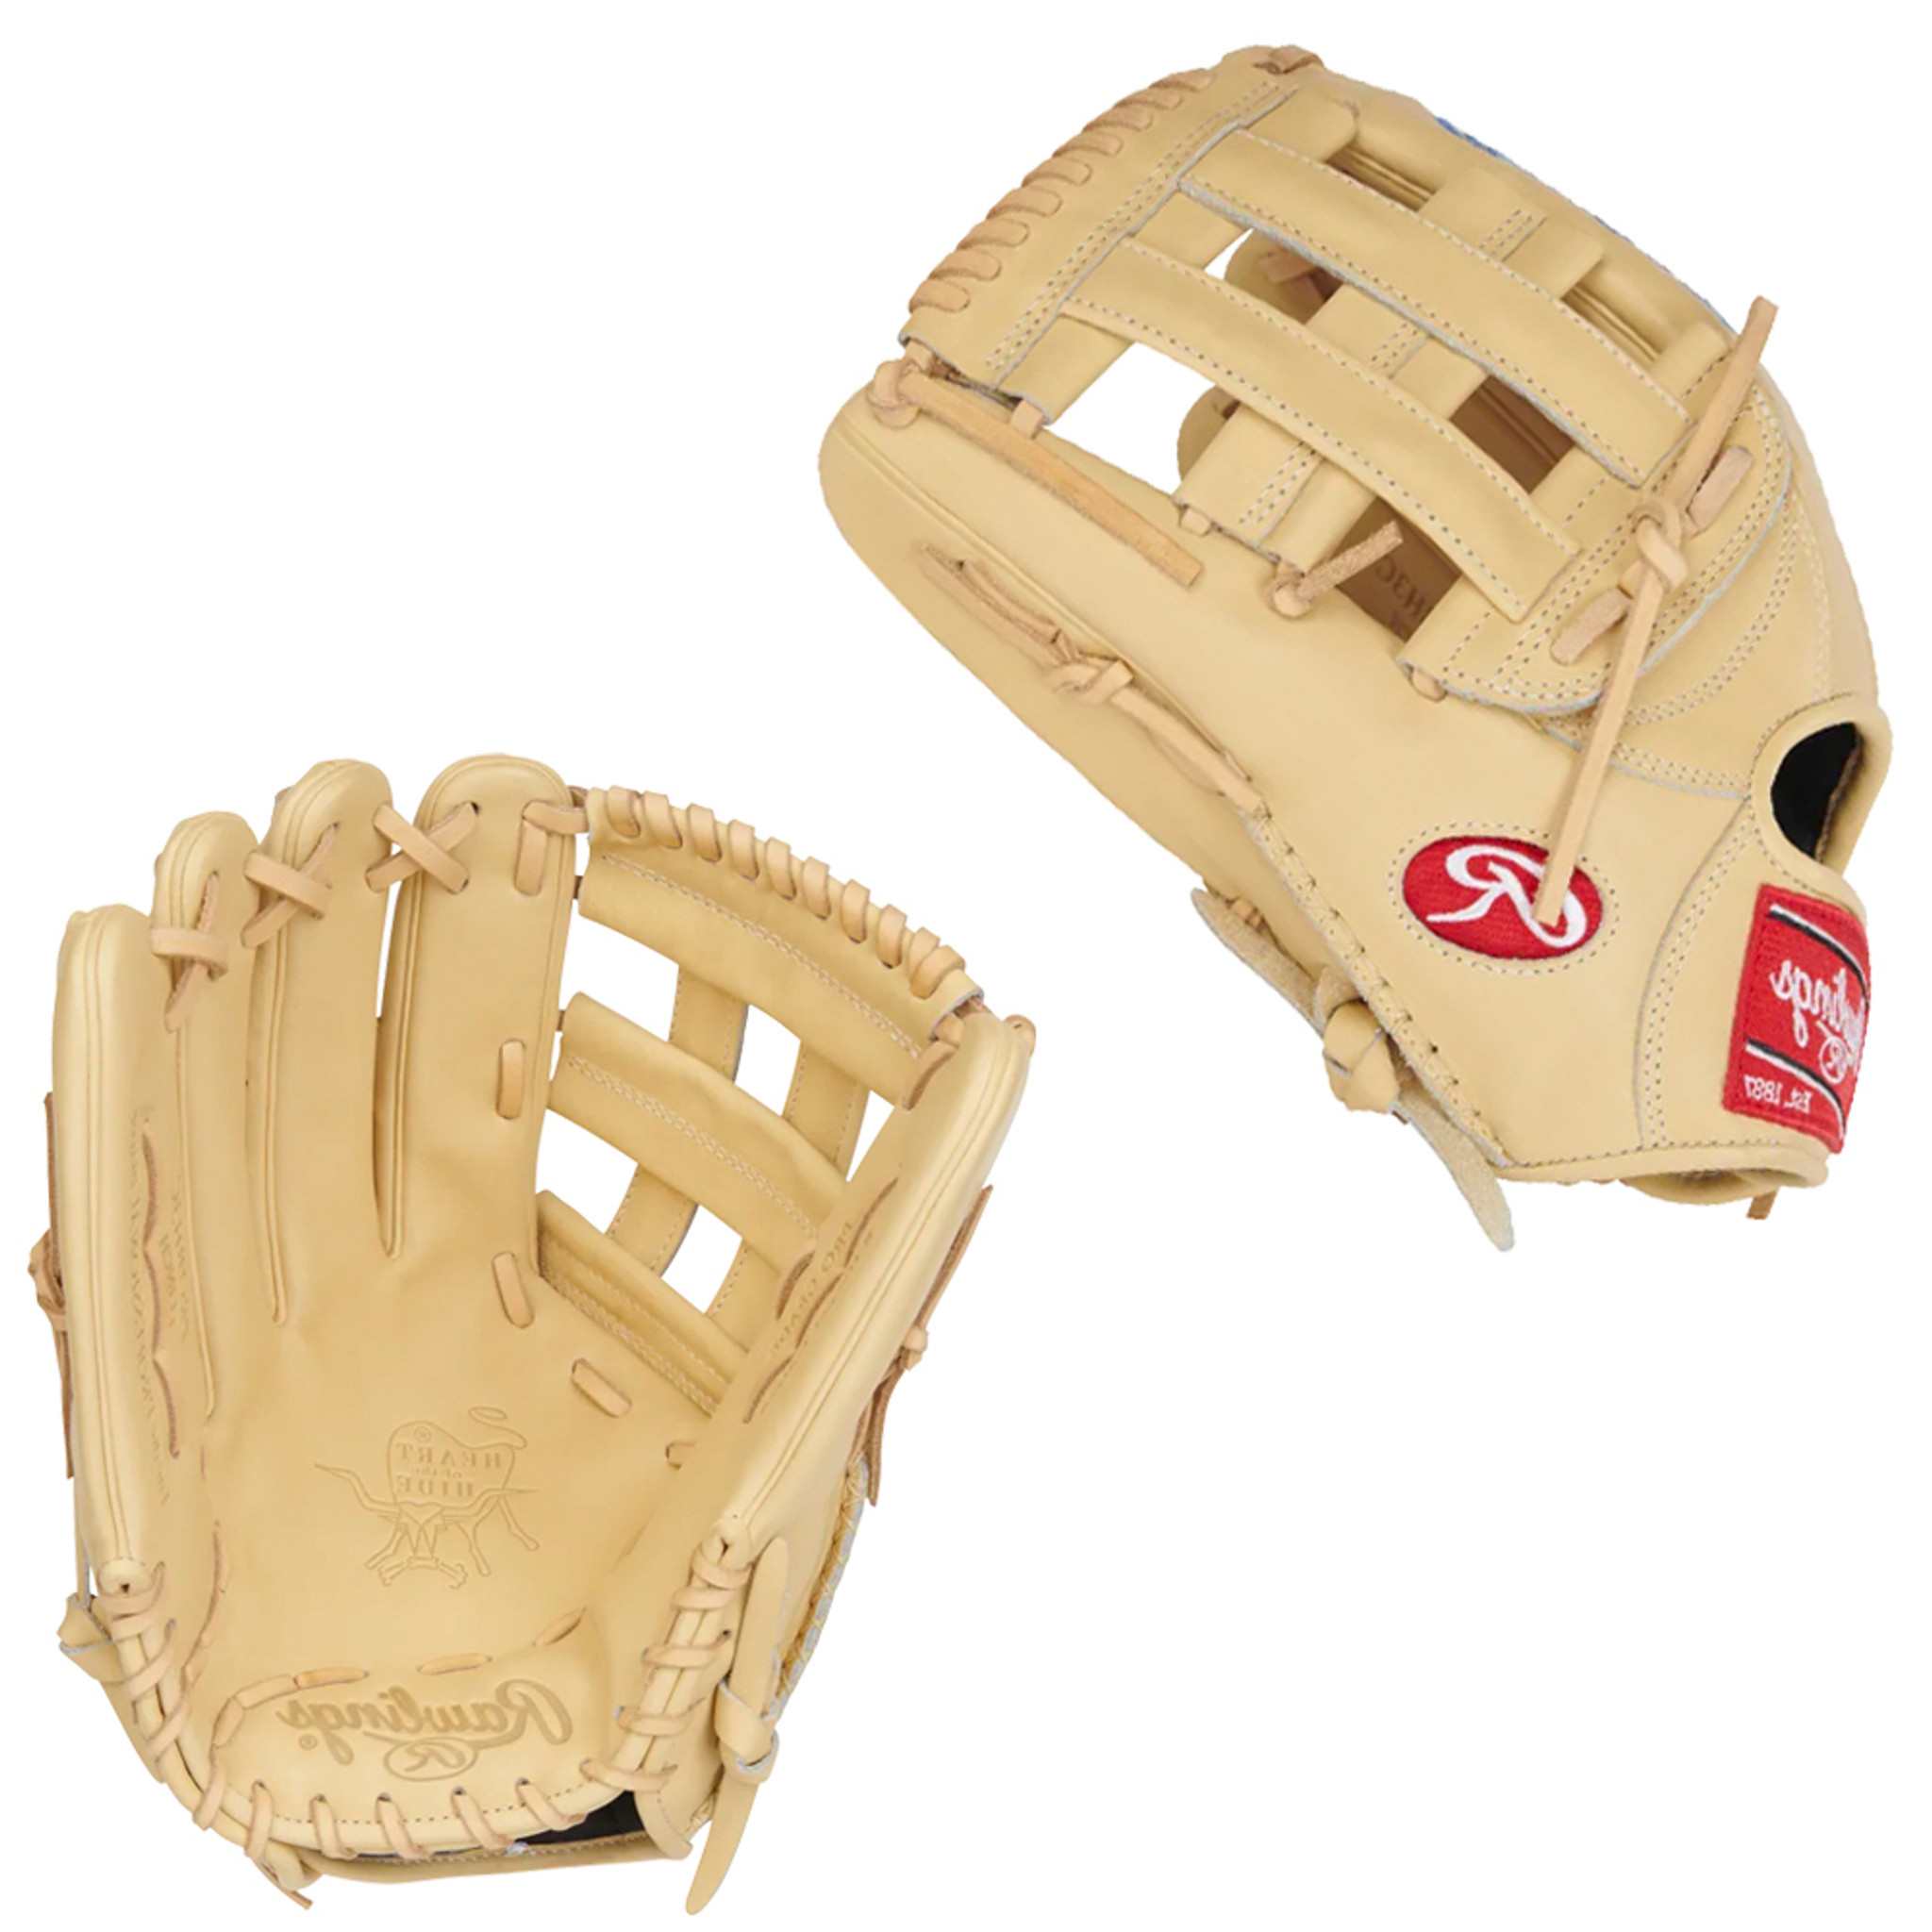 Rawlings Heart of the Hide Bryce Harper Outfield Glove